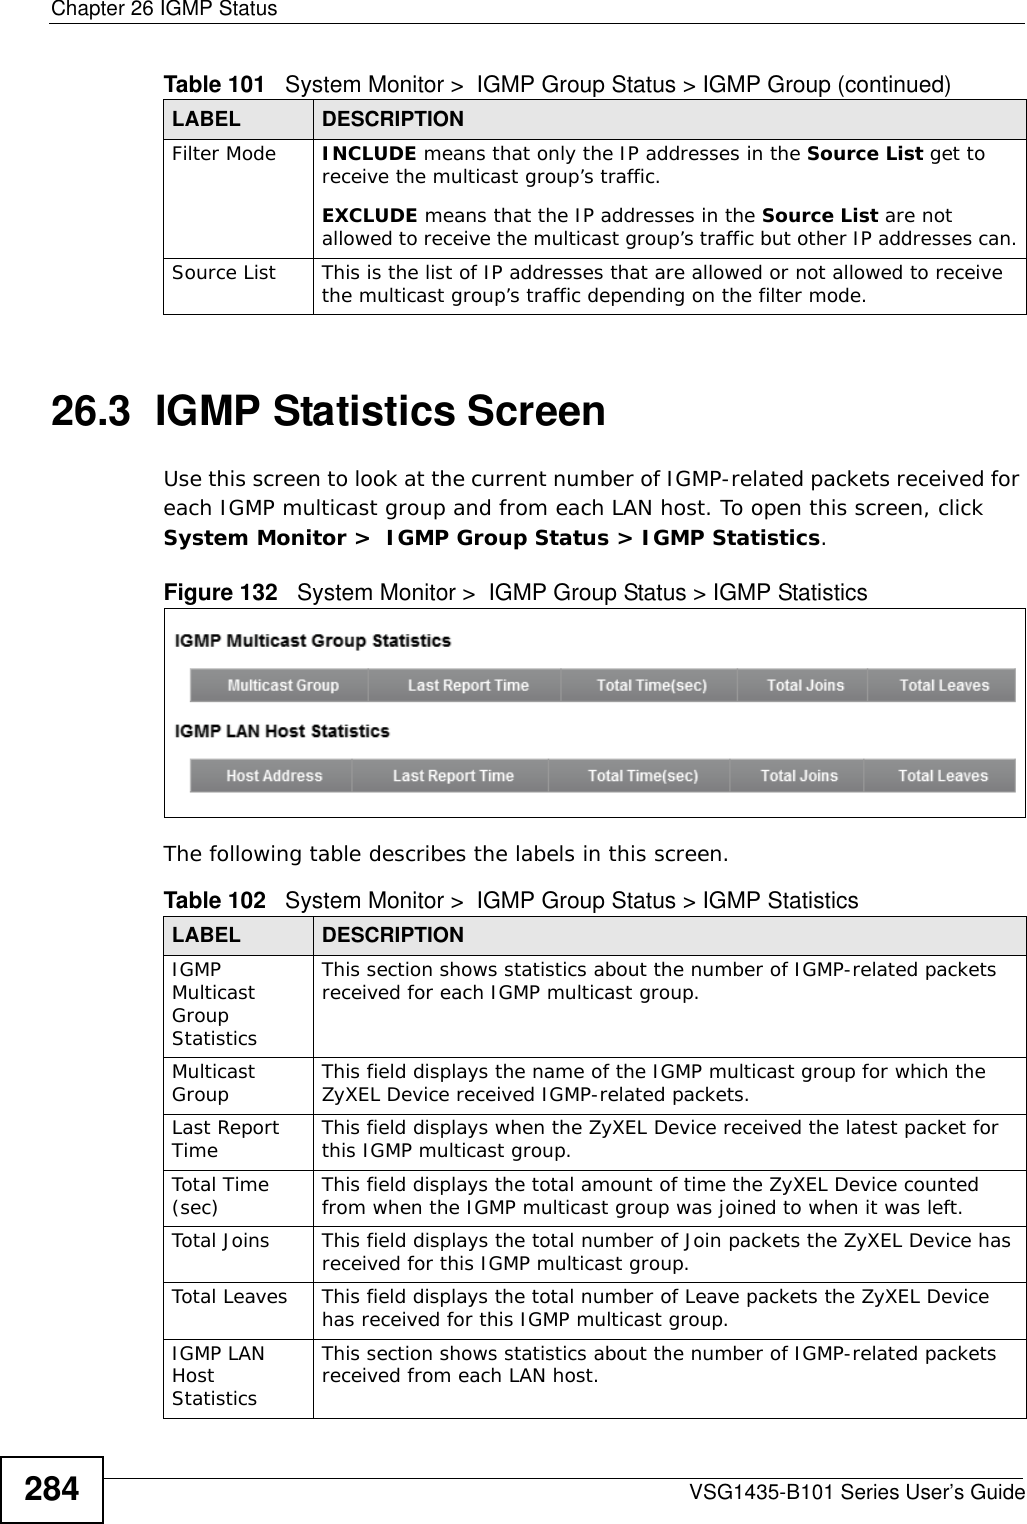 Chapter 26 IGMP StatusVSG1435-B101 Series User’s Guide28426.3  IGMP Statistics ScreenUse this screen to look at the current number of IGMP-related packets received for each IGMP multicast group and from each LAN host. To open this screen, click System Monitor &gt;  IGMP Group Status &gt; IGMP Statistics.Figure 132   System Monitor &gt;  IGMP Group Status &gt; IGMP StatisticsThe following table describes the labels in this screen.Filter Mode  INCLUDE means that only the IP addresses in the Source List get to receive the multicast group’s traffic.EXCLUDE means that the IP addresses in the Source List are not allowed to receive the multicast group’s traffic but other IP addresses can.Source List This is the list of IP addresses that are allowed or not allowed to receive the multicast group’s traffic depending on the filter mode.Table 101   System Monitor &gt;  IGMP Group Status &gt; IGMP Group (continued)LABEL DESCRIPTIONTable 102   System Monitor &gt;  IGMP Group Status &gt; IGMP StatisticsLABEL DESCRIPTIONIGMP Multicast Group StatisticsThis section shows statistics about the number of IGMP-related packets received for each IGMP multicast group.Multicast Group  This field displays the name of the IGMP multicast group for which the ZyXEL Device received IGMP-related packets. Last Report Time This field displays when the ZyXEL Device received the latest packet for this IGMP multicast group. Total Time (sec) This field displays the total amount of time the ZyXEL Device counted from when the IGMP multicast group was joined to when it was left. Total Joins  This field displays the total number of Join packets the ZyXEL Device has received for this IGMP multicast group.Total Leaves This field displays the total number of Leave packets the ZyXEL Device has received for this IGMP multicast group.IGMP LAN Host StatisticsThis section shows statistics about the number of IGMP-related packets received from each LAN host.